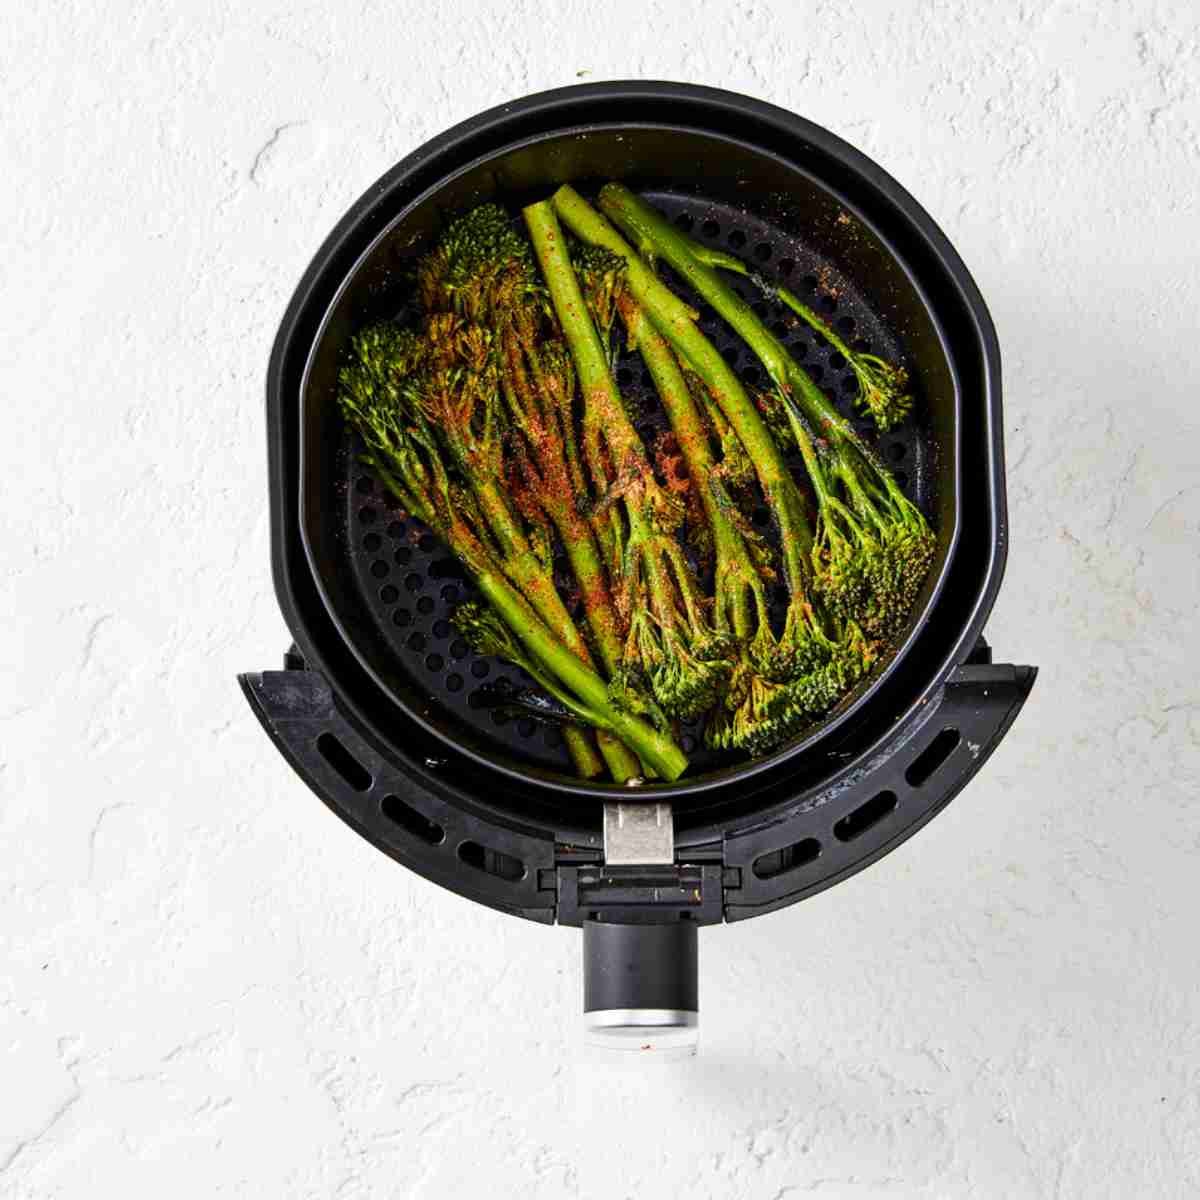 Raw broccolini in an air fryer basked sprinkled with all purpose seasoning.